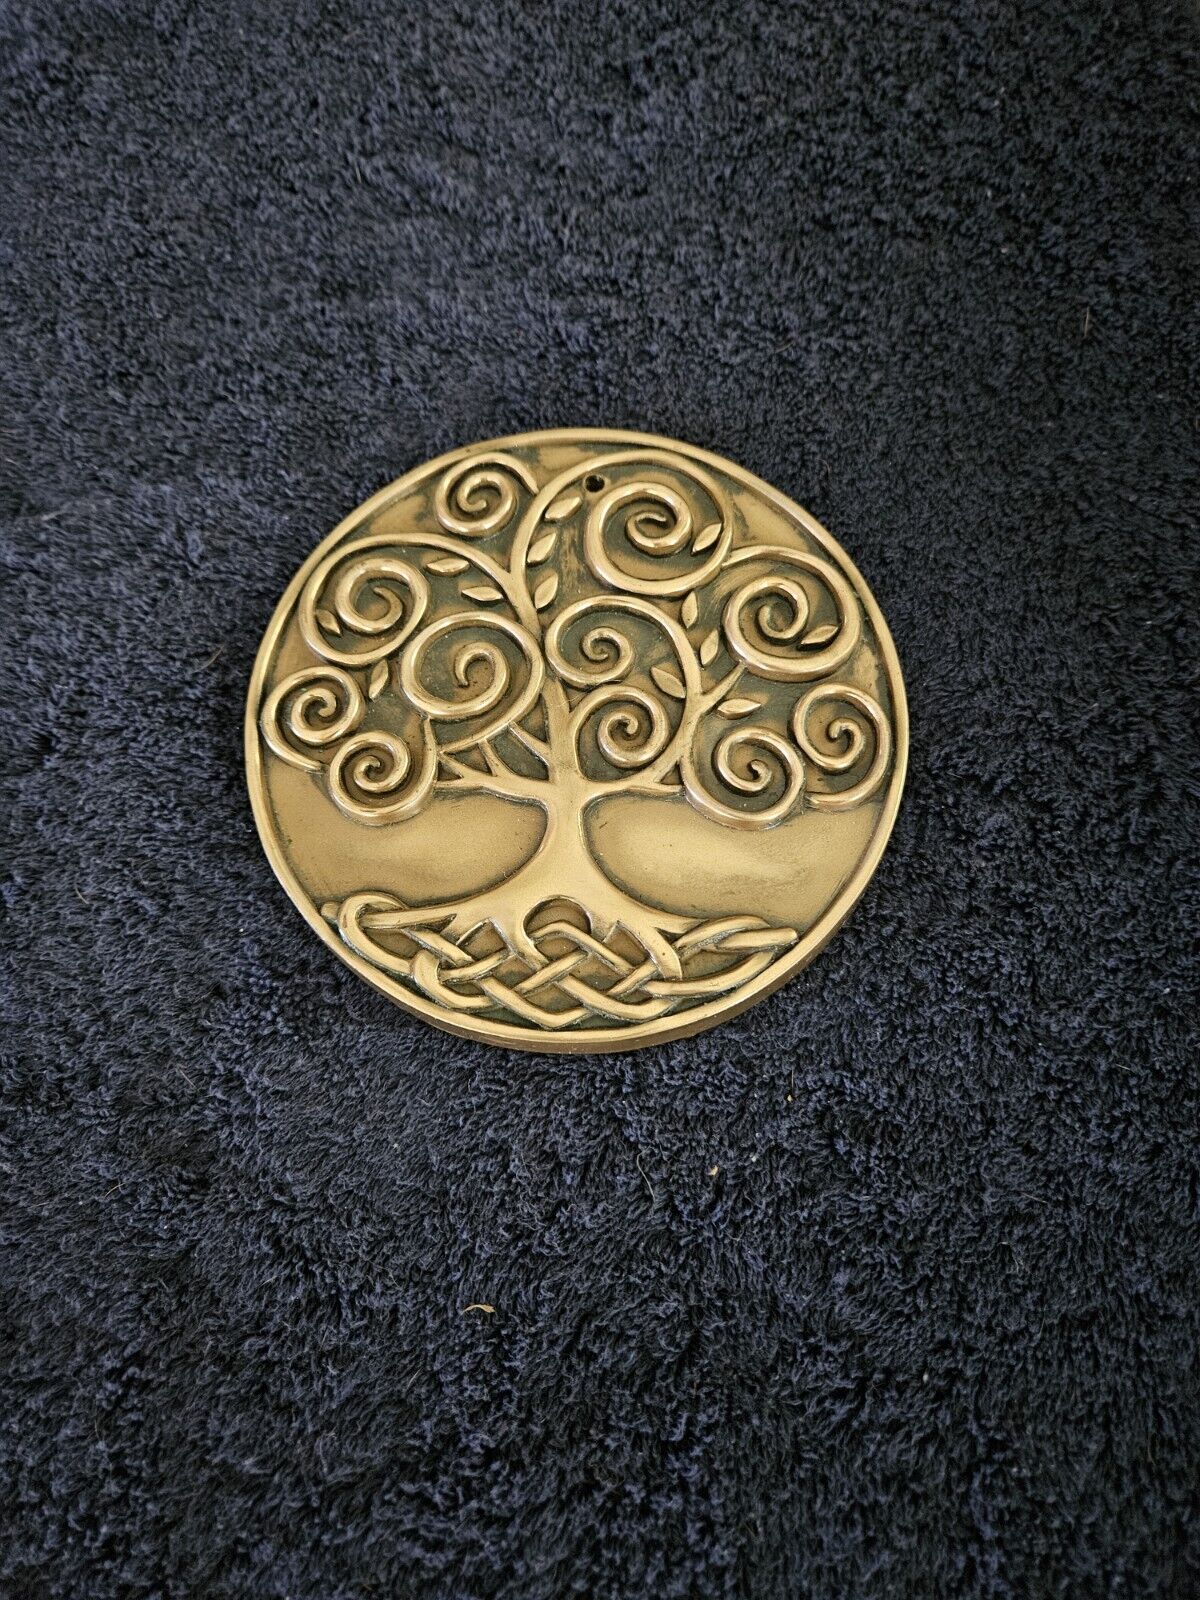 Bronze Plated Celtic Tree Of Life Wall Plaque